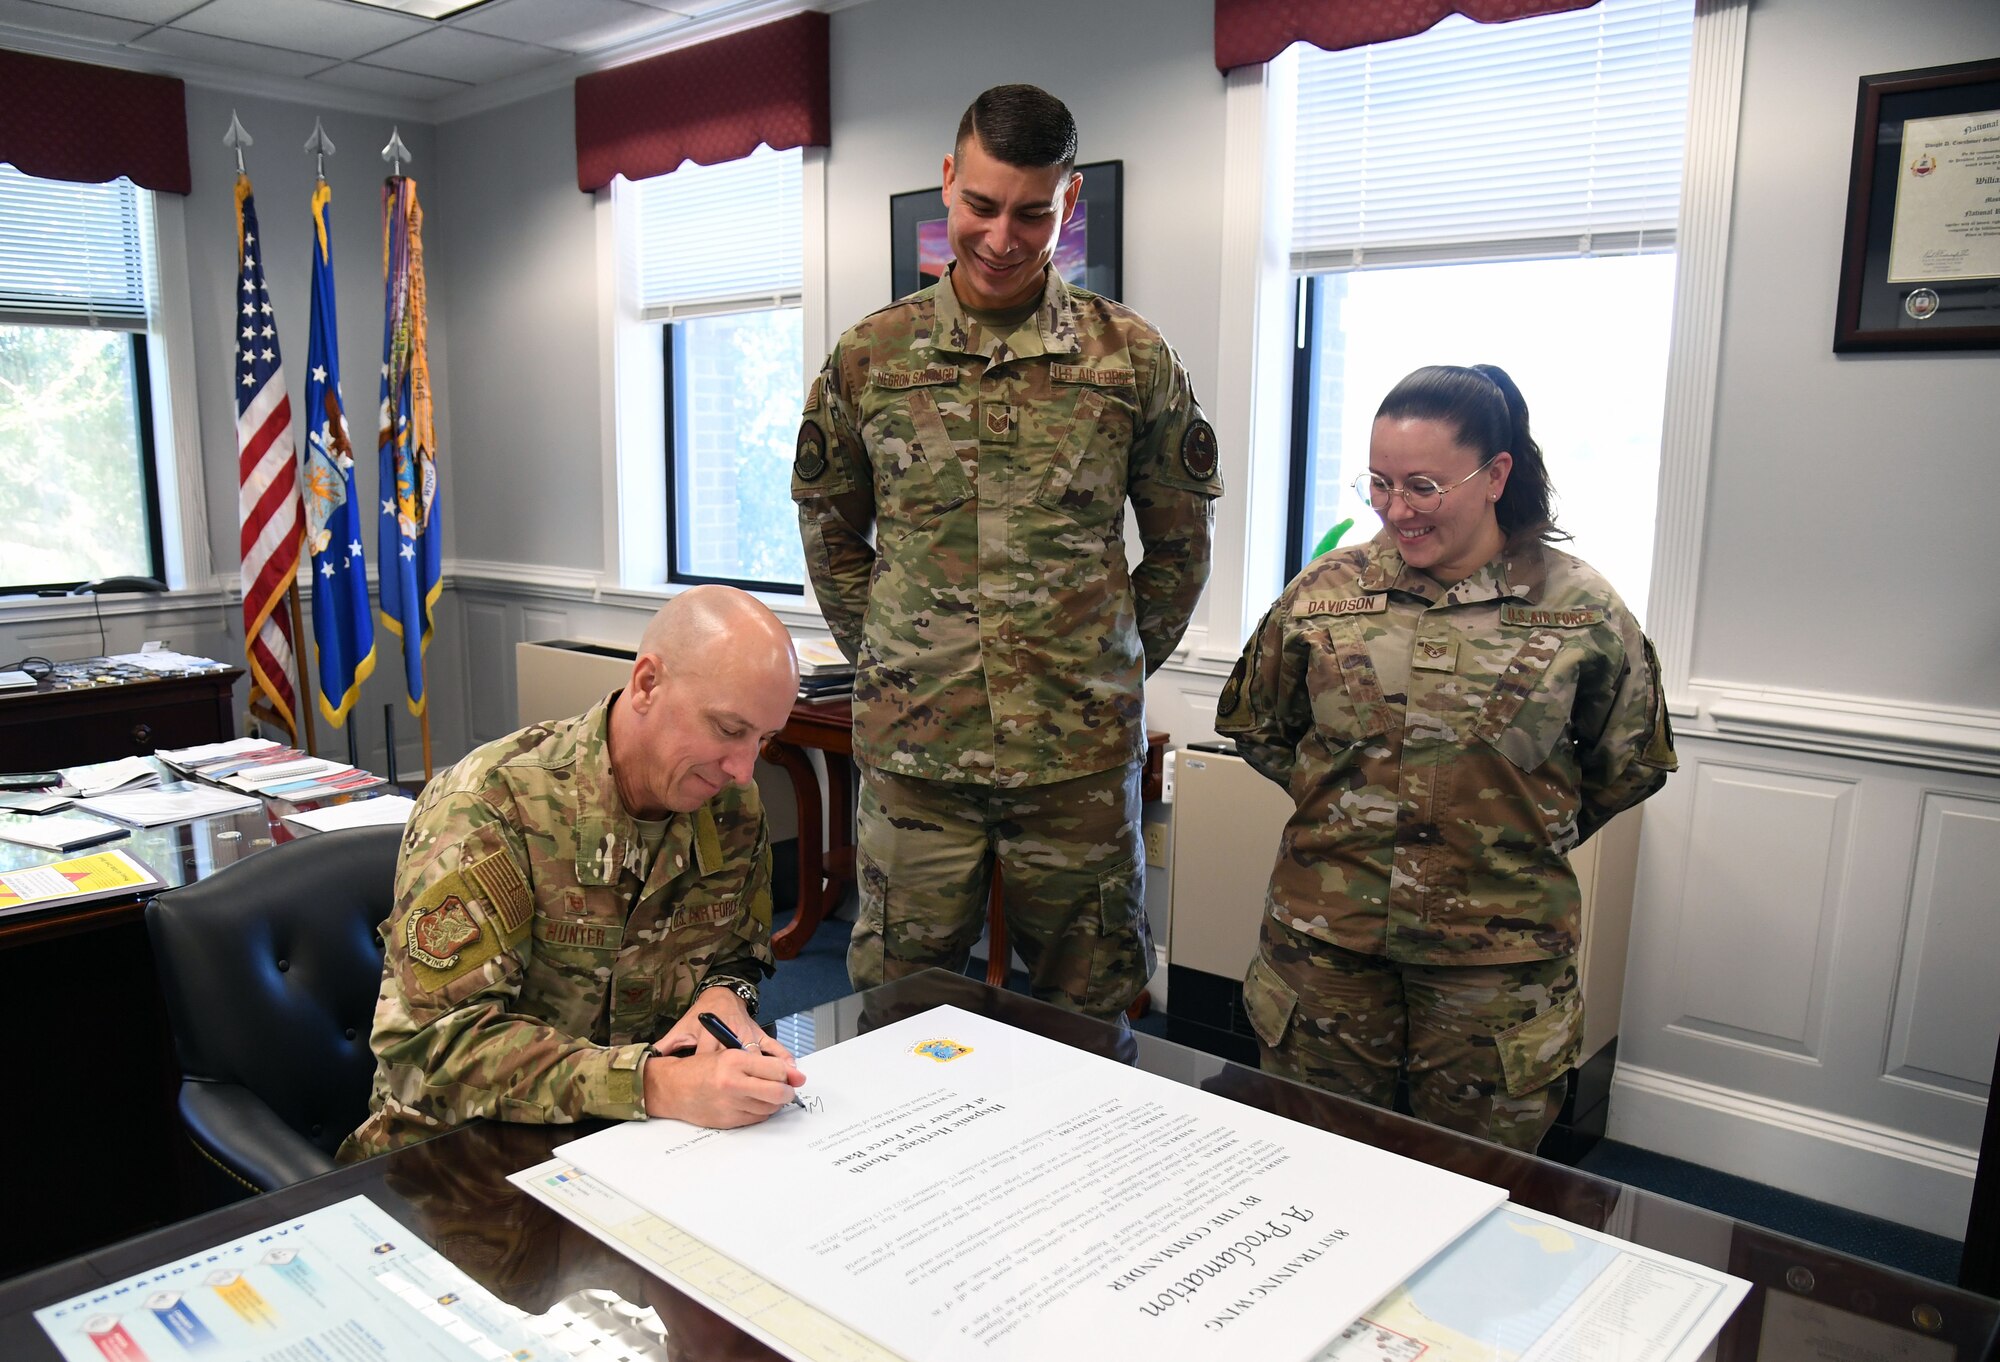 U.S. Air Force Col. William Hunter, 81st Training Wing commander, signs the Hispanic Heritage Month proclamation as Tech. Sgt. Hernan Negron Santiago and Staff Sgt. Danielle Davidson, 334th Training Squadron instructors, stand by inside the 81st TRW headquarters building at Keesler Air Force Base, Mississippi, Sept. 14, 2022. Hispanic Heritage Month is celebrated September 15 through October 15. (U.S. Air Force photo by Kemberly Groue)